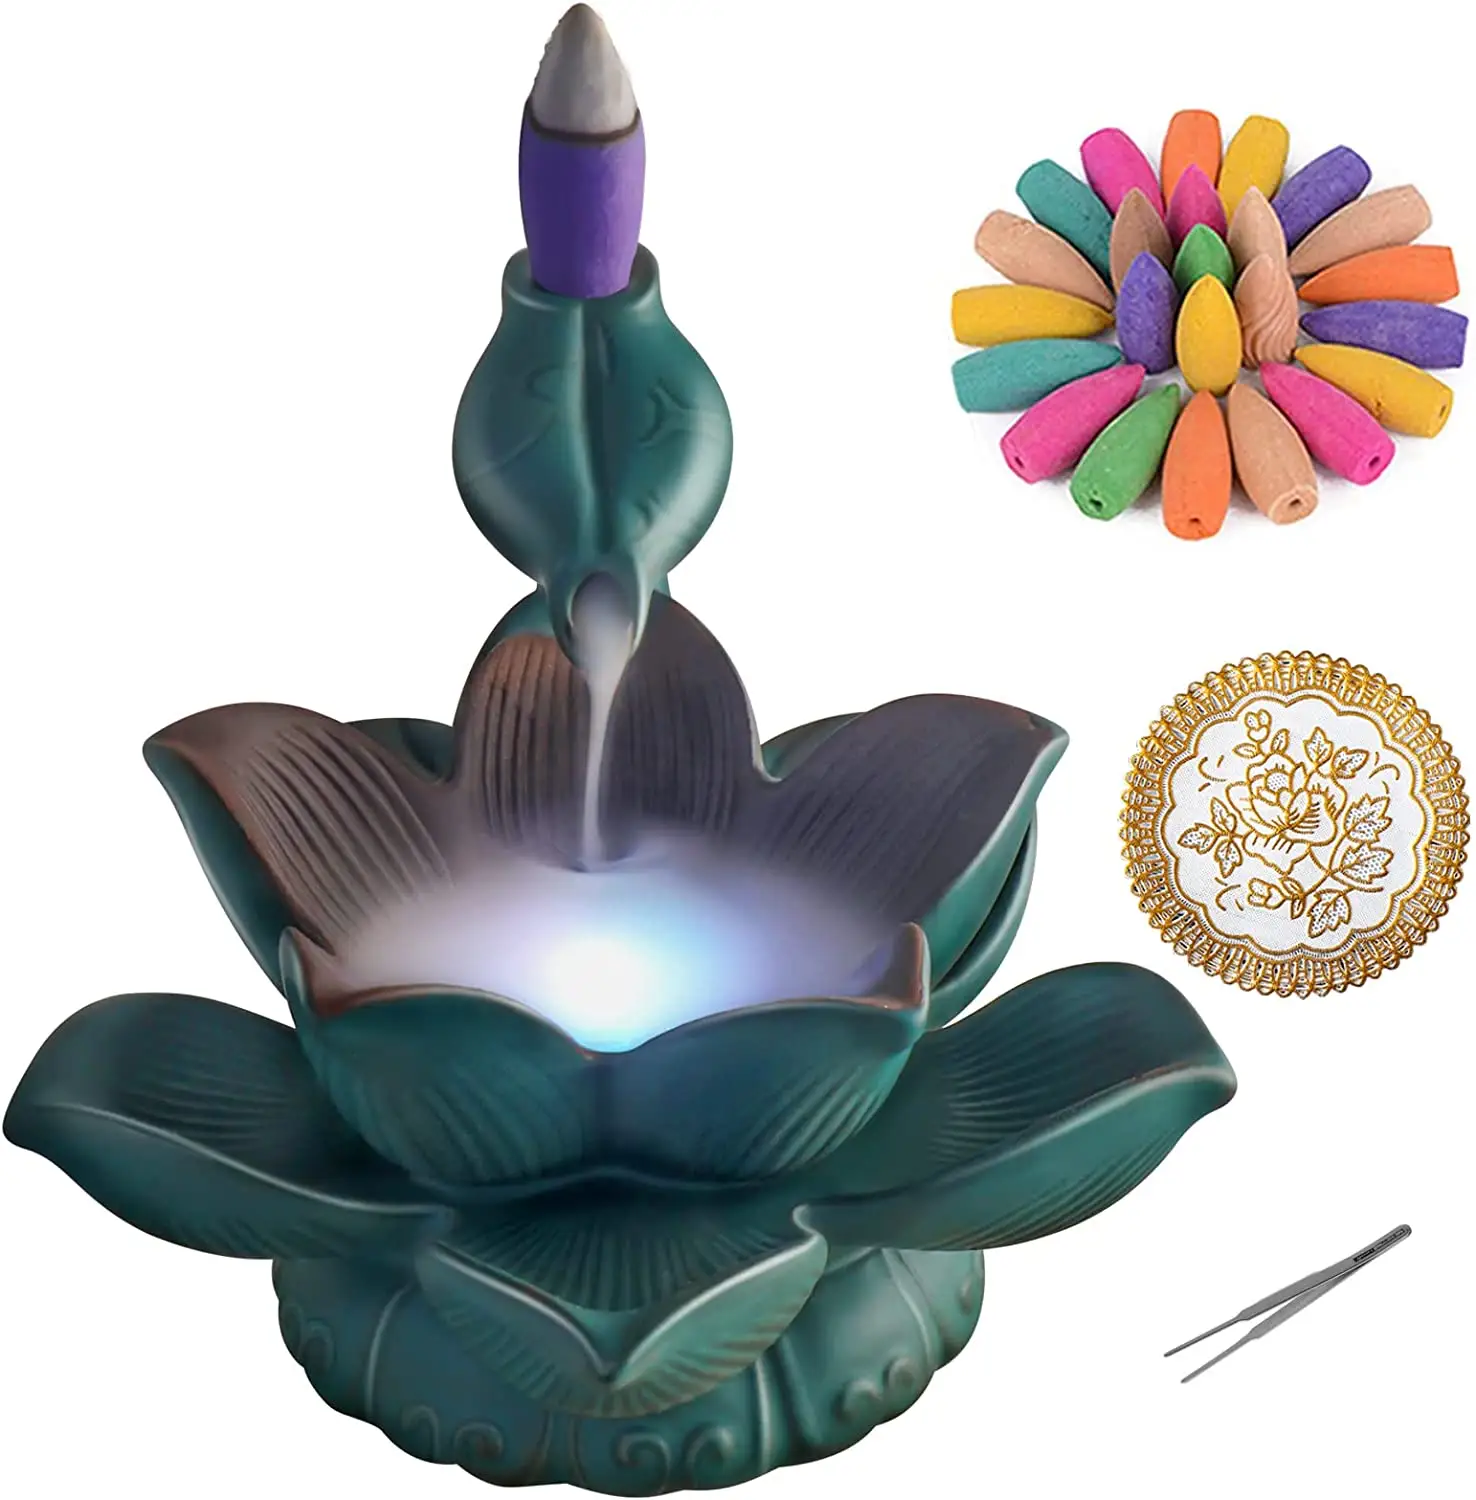 Ceramic LED Lotus Incense Burner Waterfall Backflow Incense Holder Aroma Smoke Fountain Censer with 20 Backflow Cones